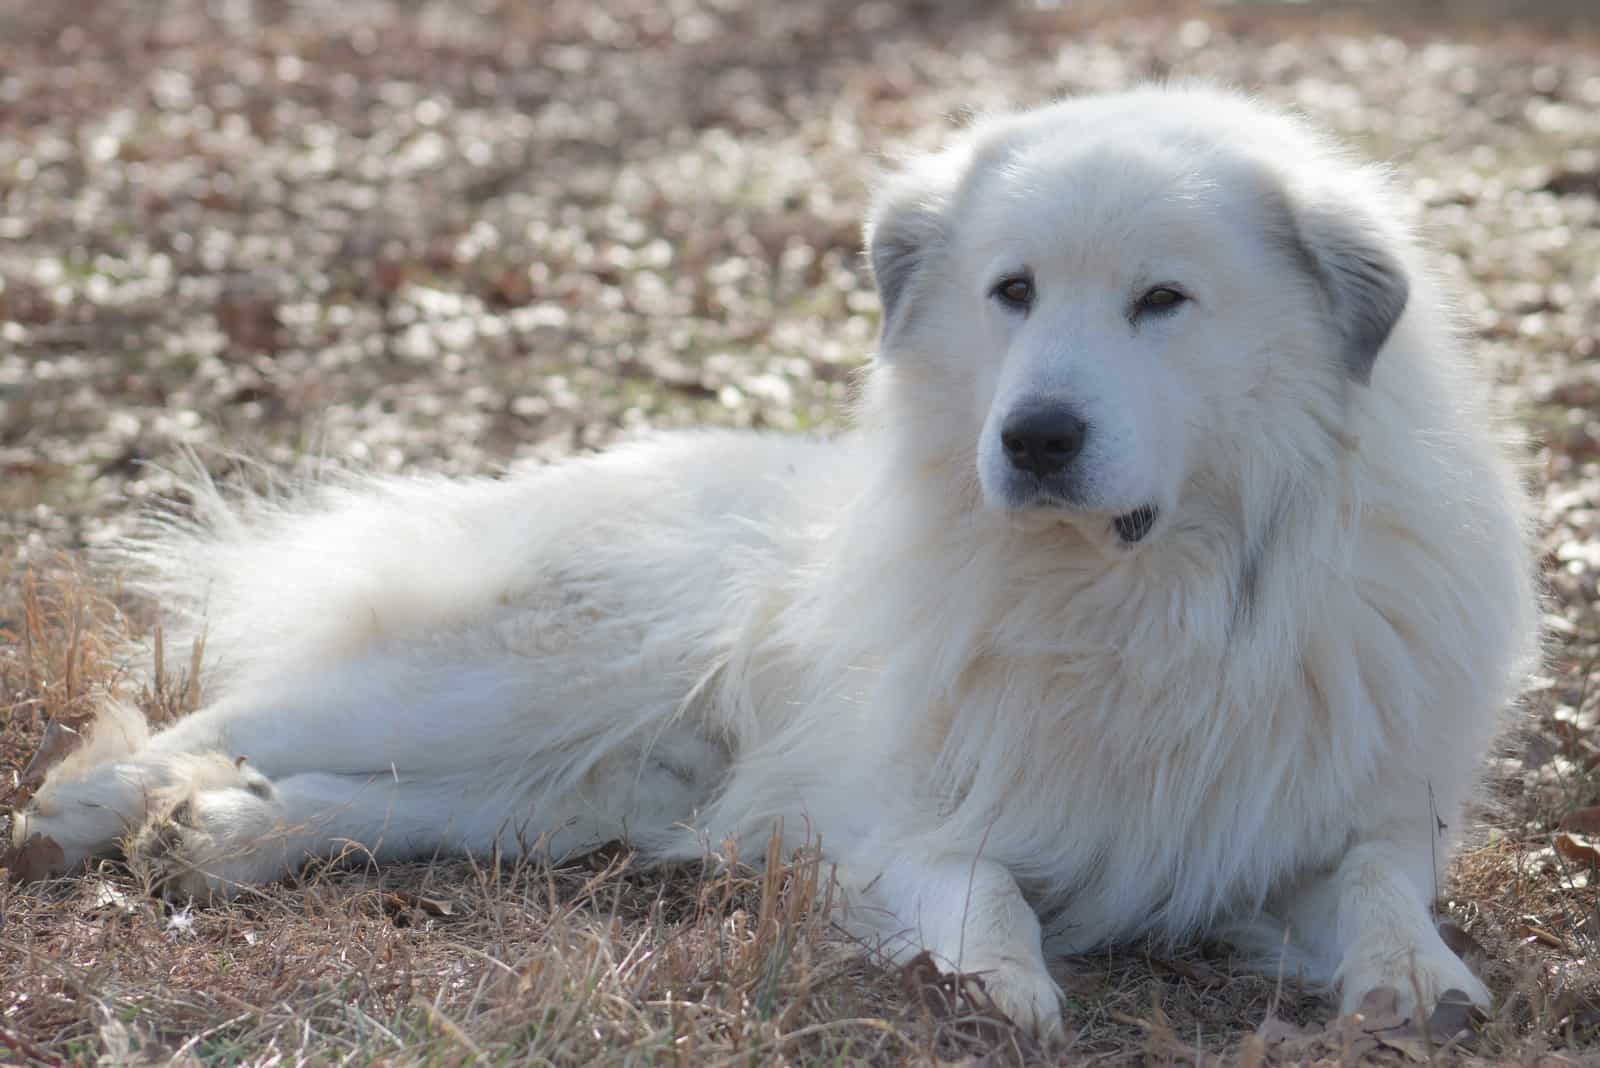 Great Pyrenees Shedding: Is There Anything You Can Do About It?